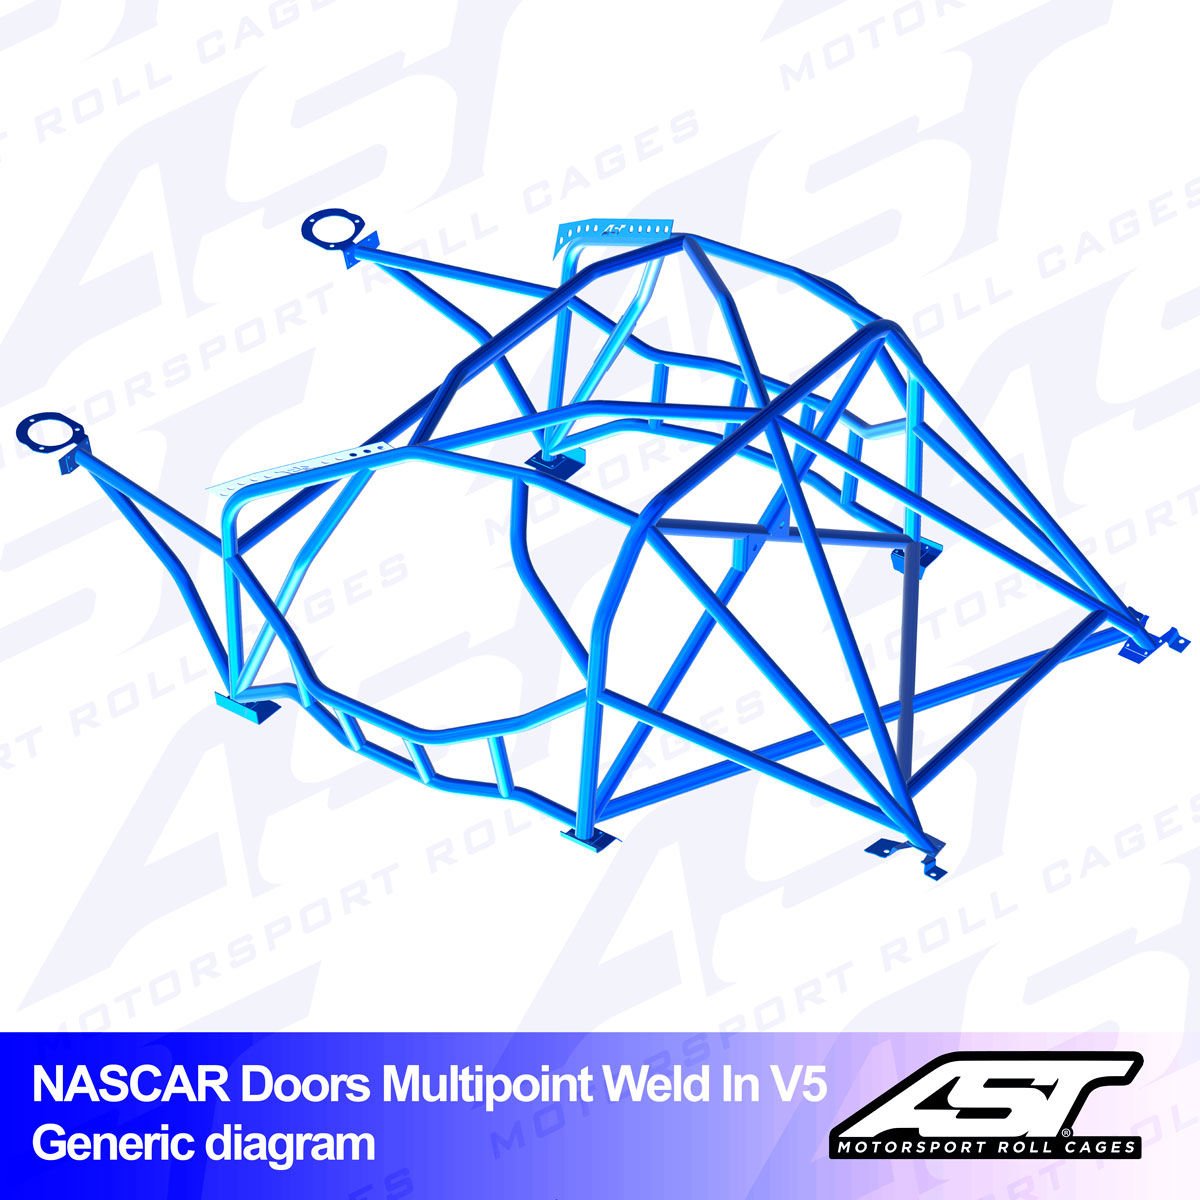 Roll Cage BMW (E92) 3-Series 2-doors Coupe RWD MULTIPOINT WELD IN V5 NASCAR-door for drift